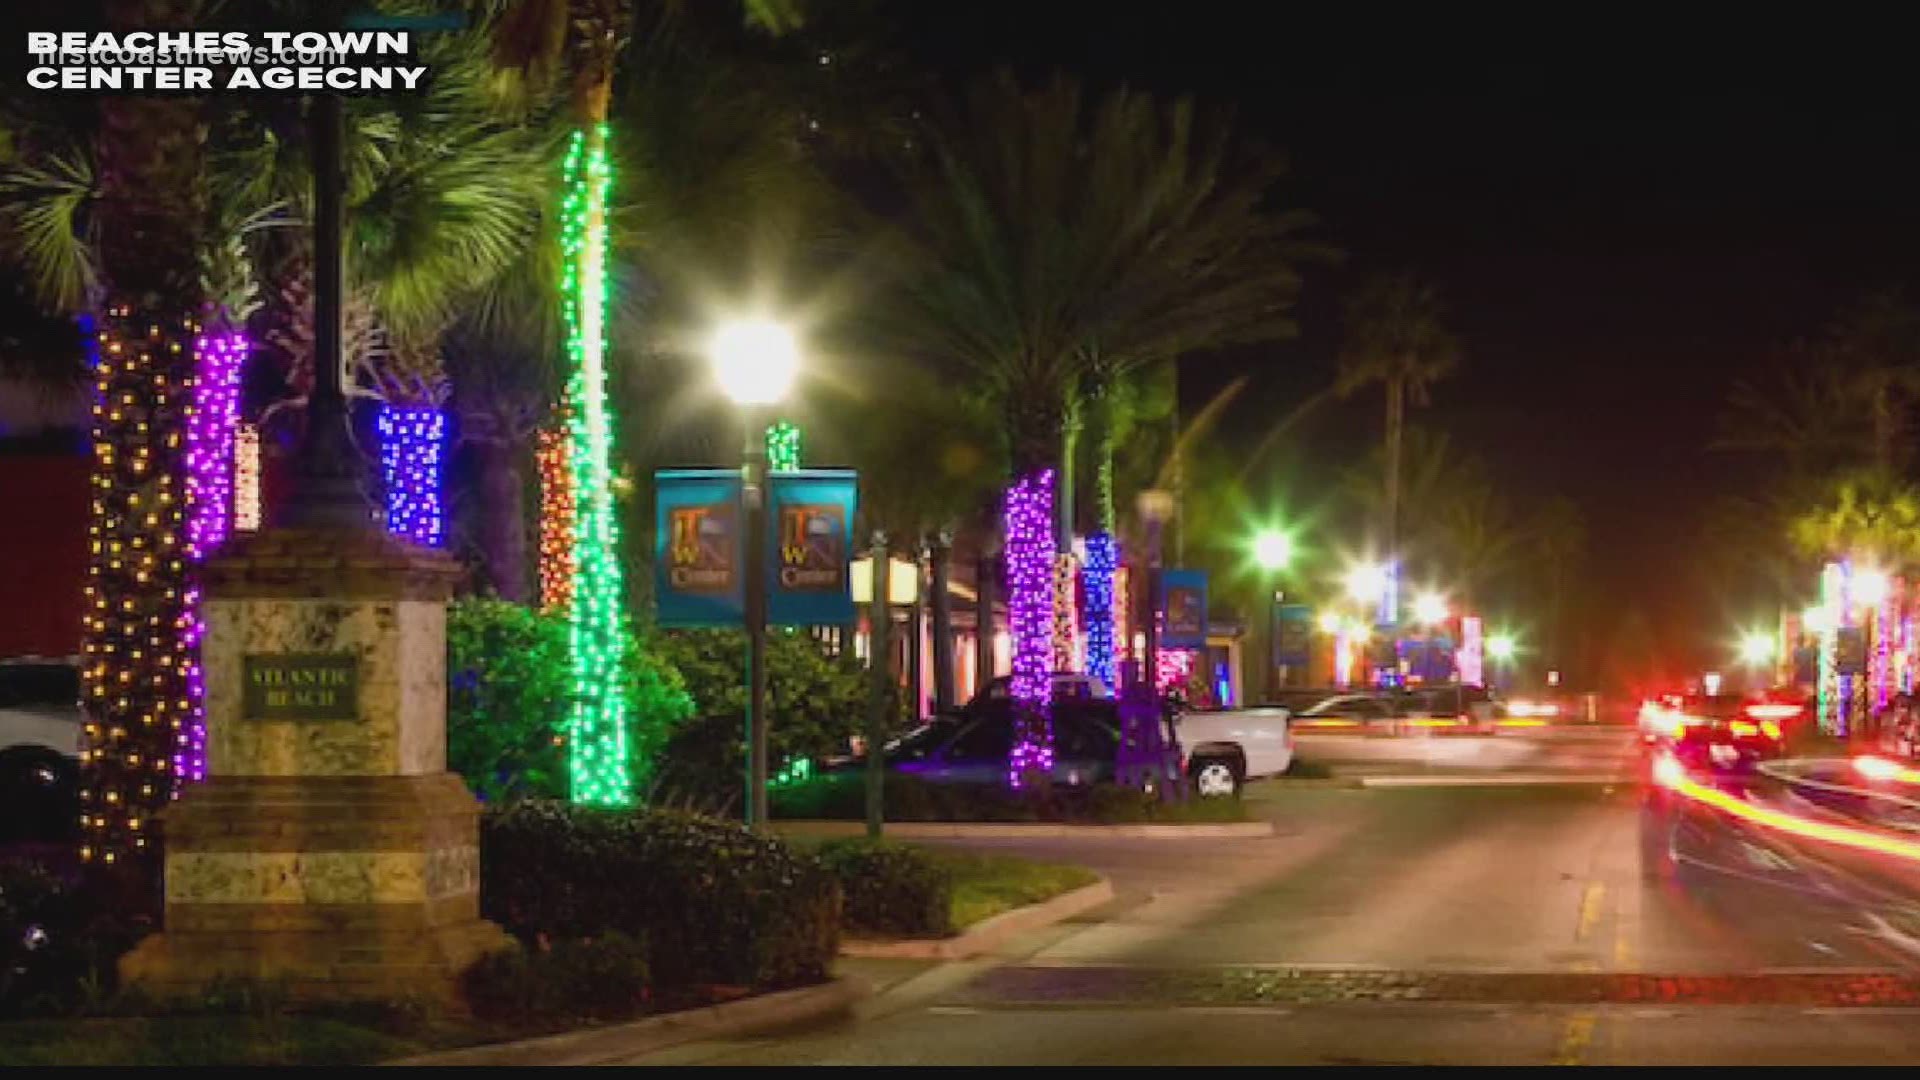 Money from these events and fundraisers may threaten beloved traditions such as funding for the Christmas tree lighting in Neptune Beach.